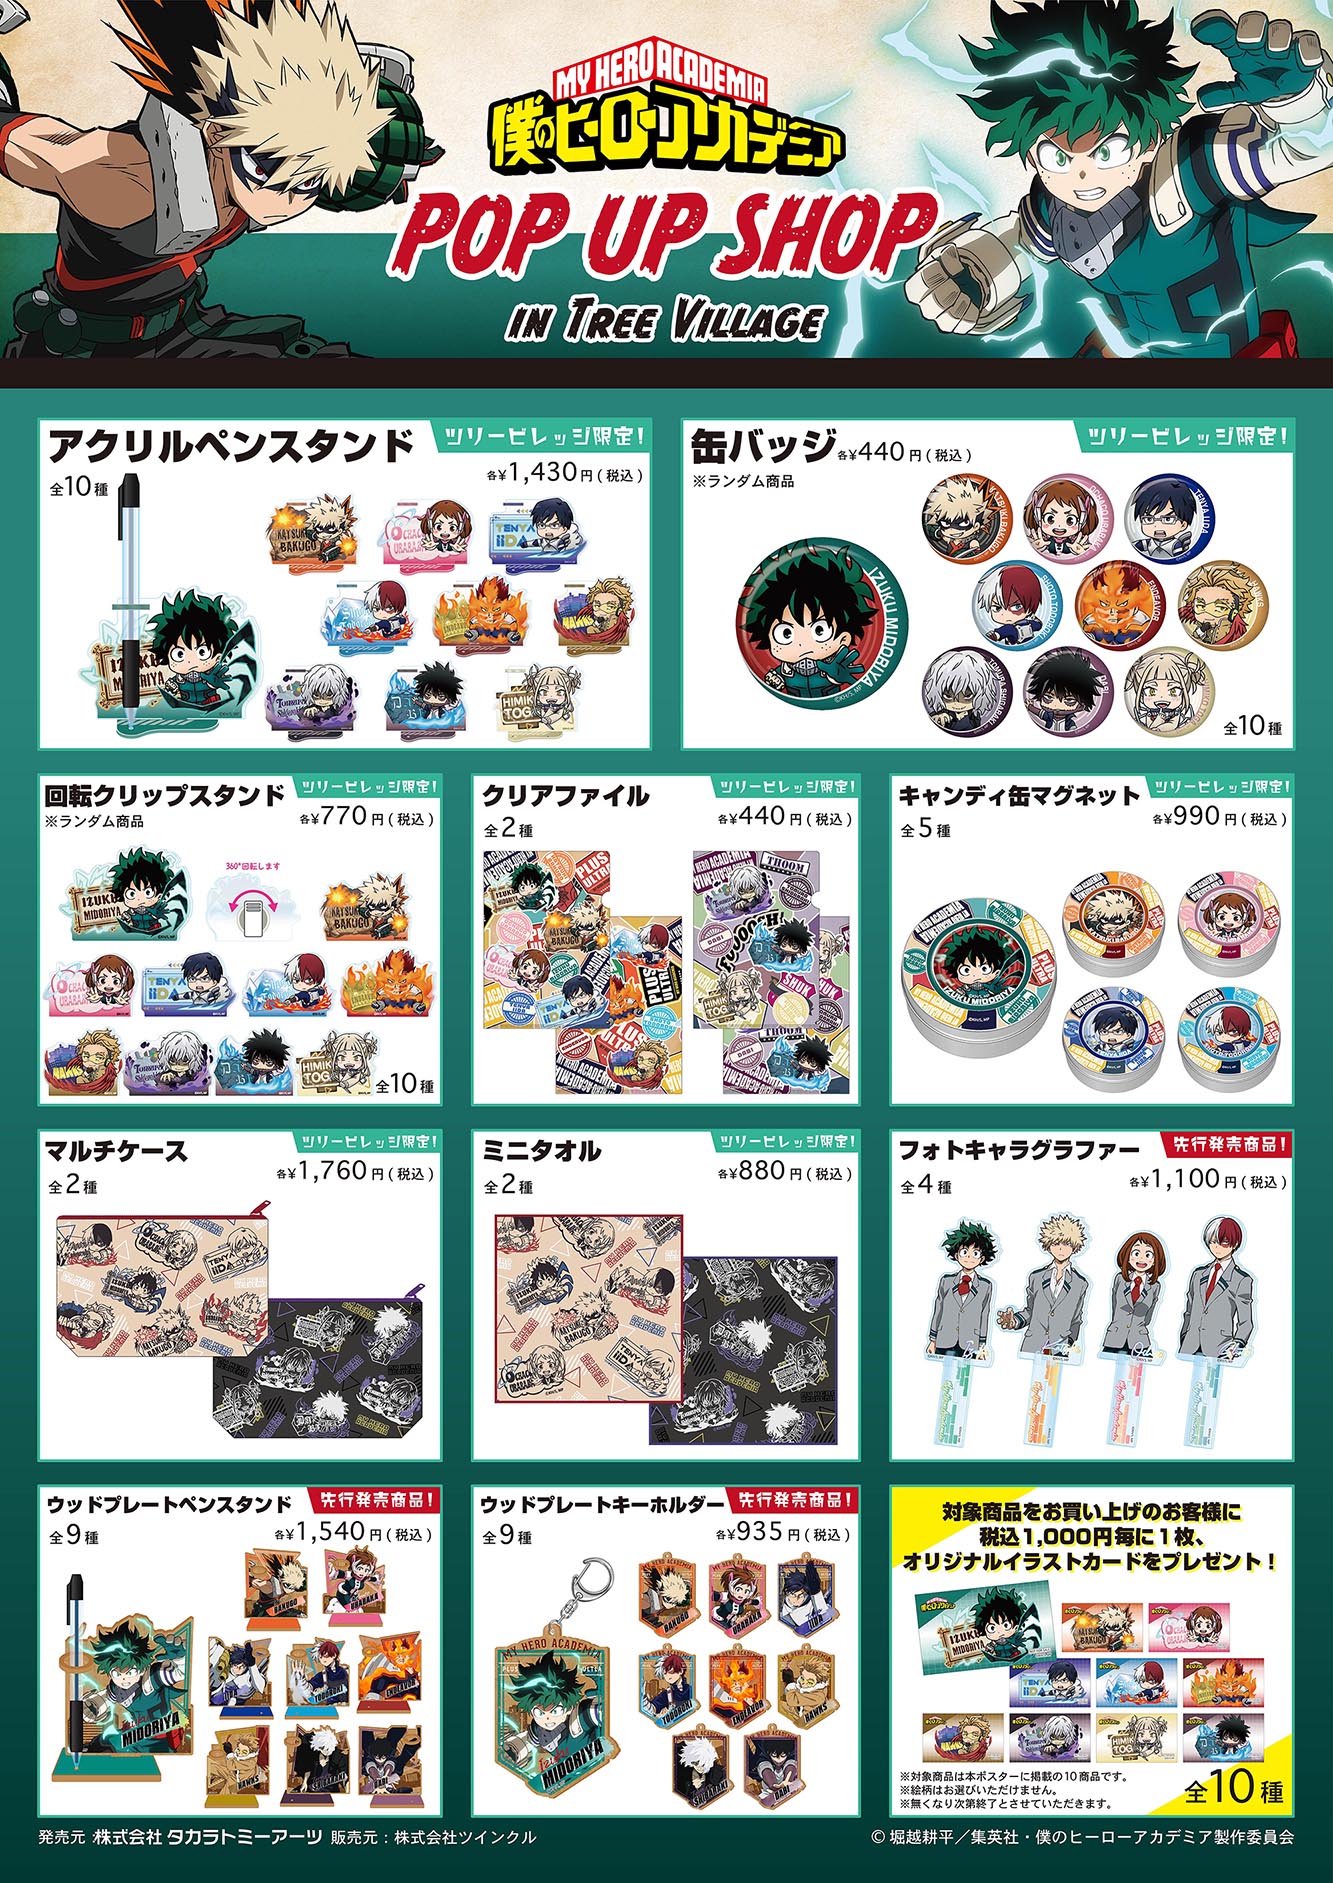 Chainsaw Man Tokyo Special Division 4 Event and Pop-Up Shop to